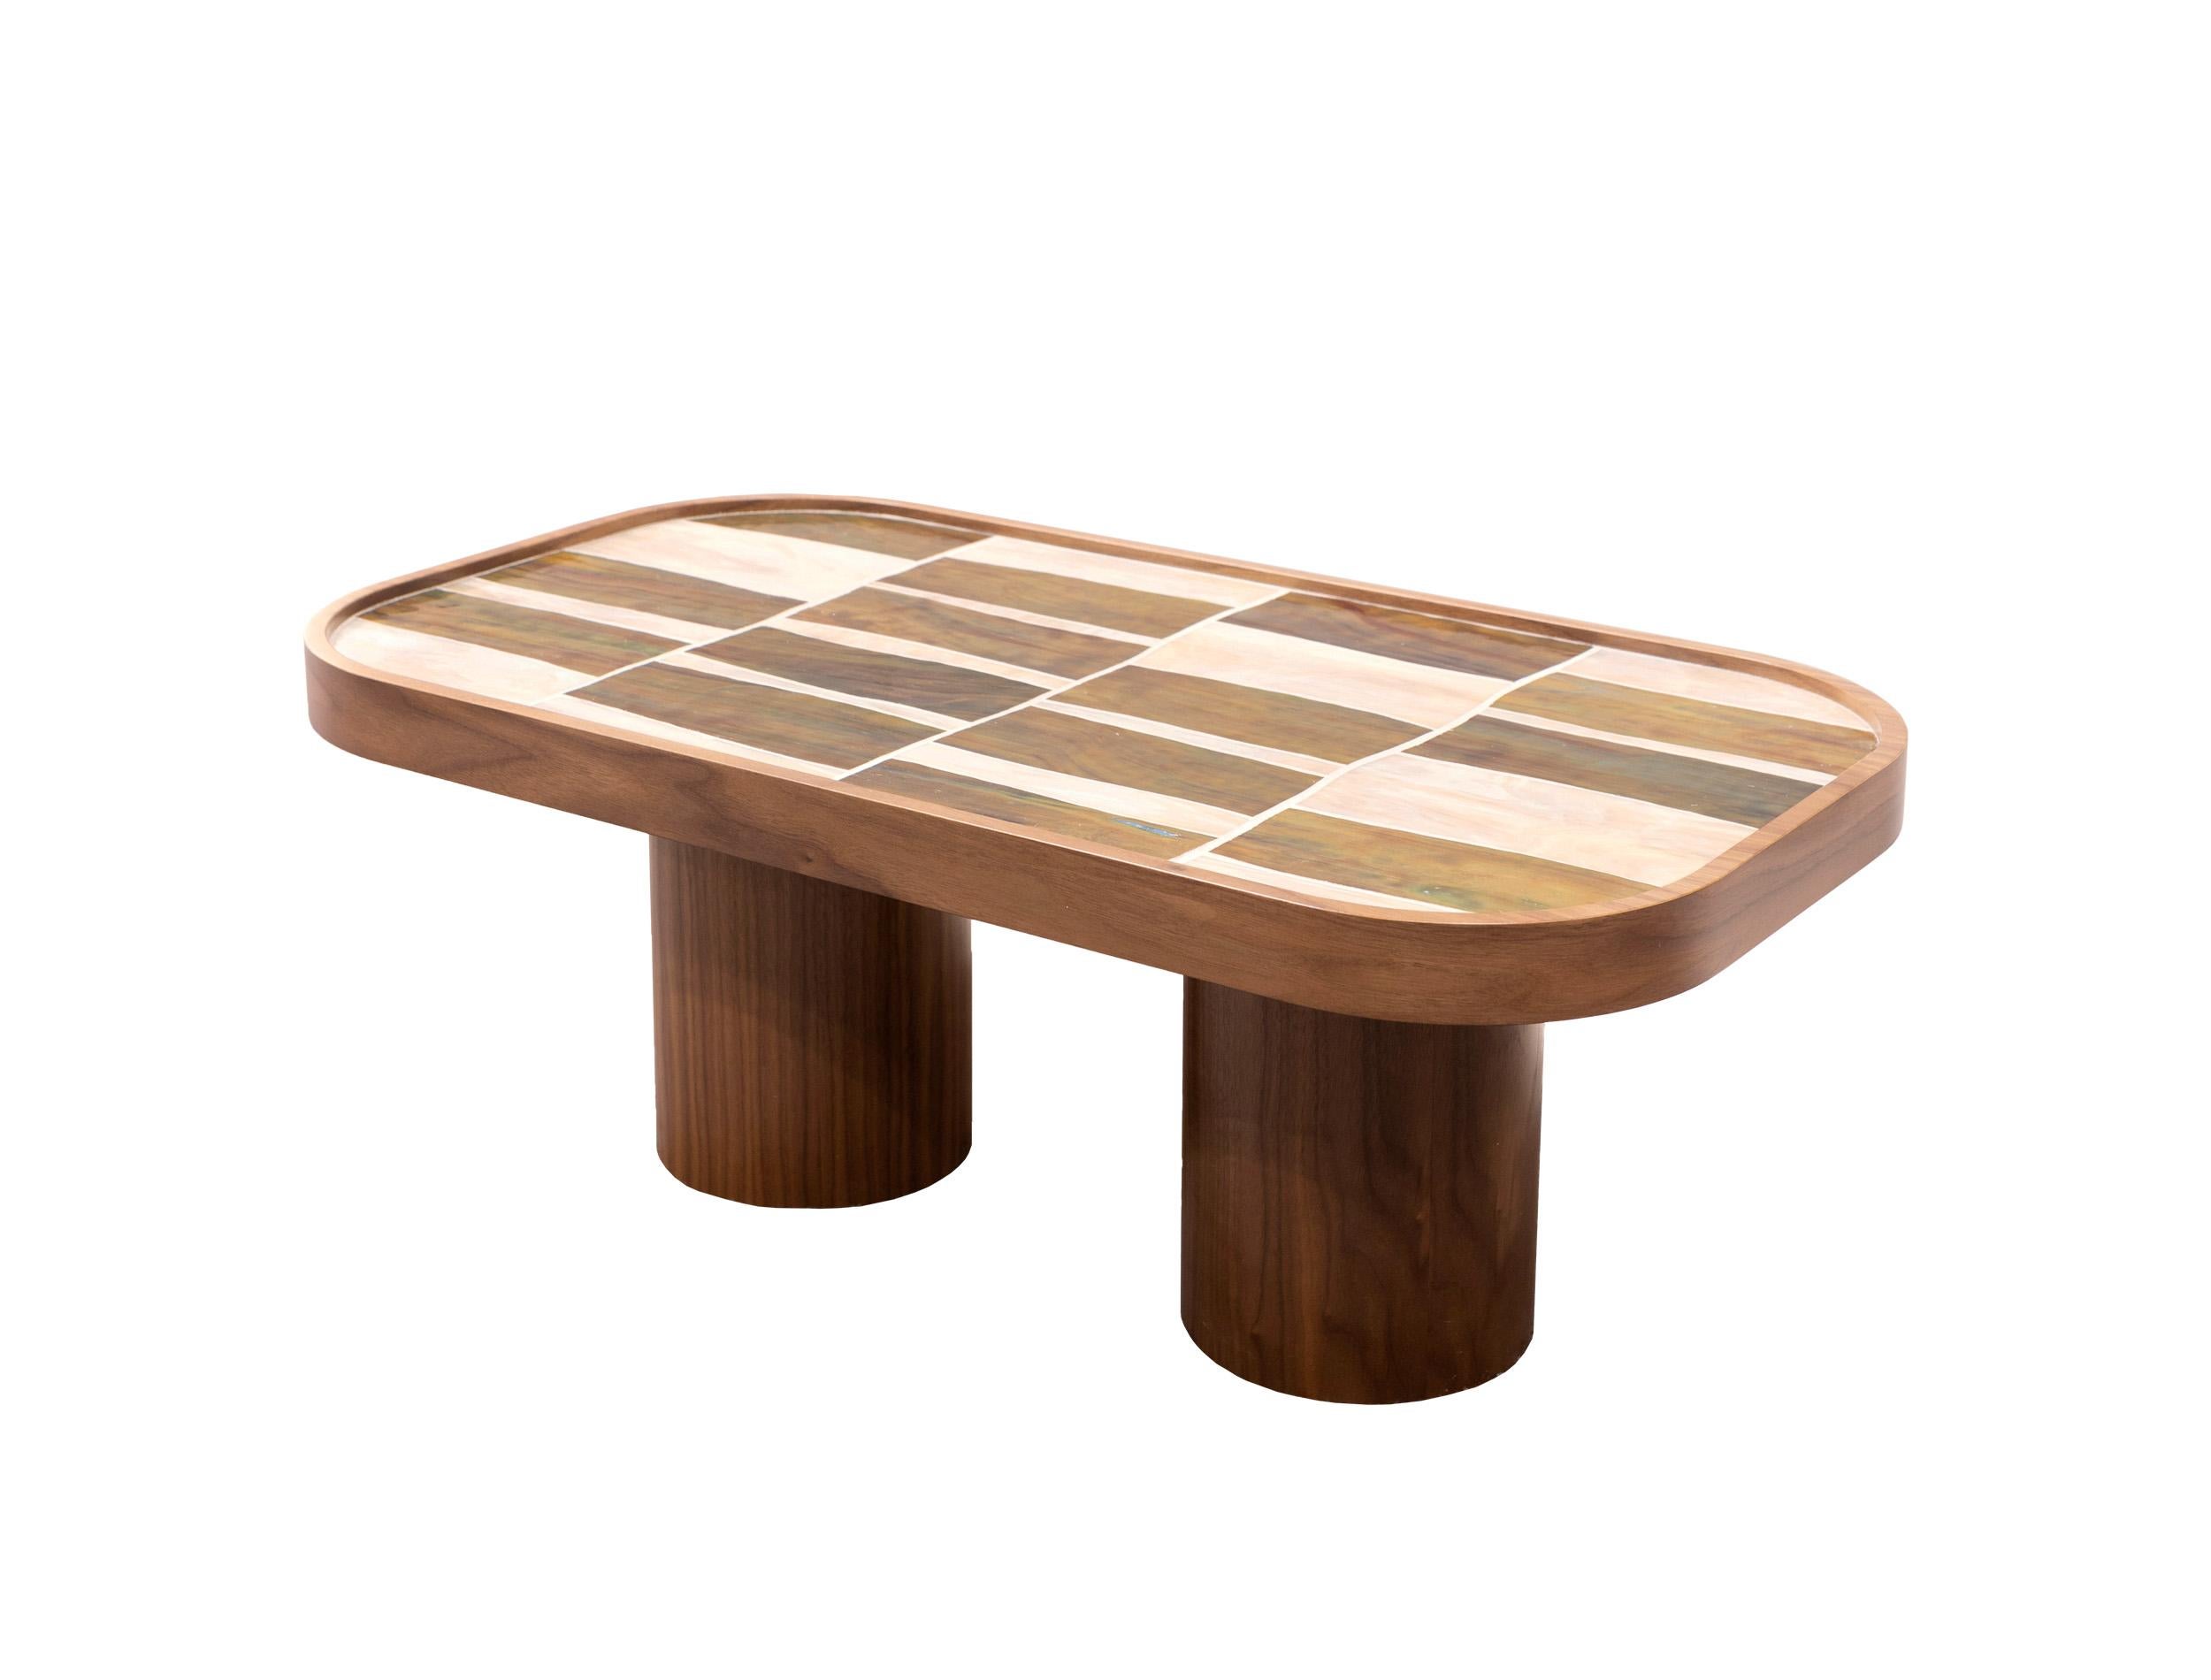 Palazzo oval coffee table with green and ivory Japaneese glass sits on 4 Walnut Wood pedestal by Ercole Home. This new bespoke coffee table design by Ercole Home is available today for your living space.
A sleek table with high craftsmanship and